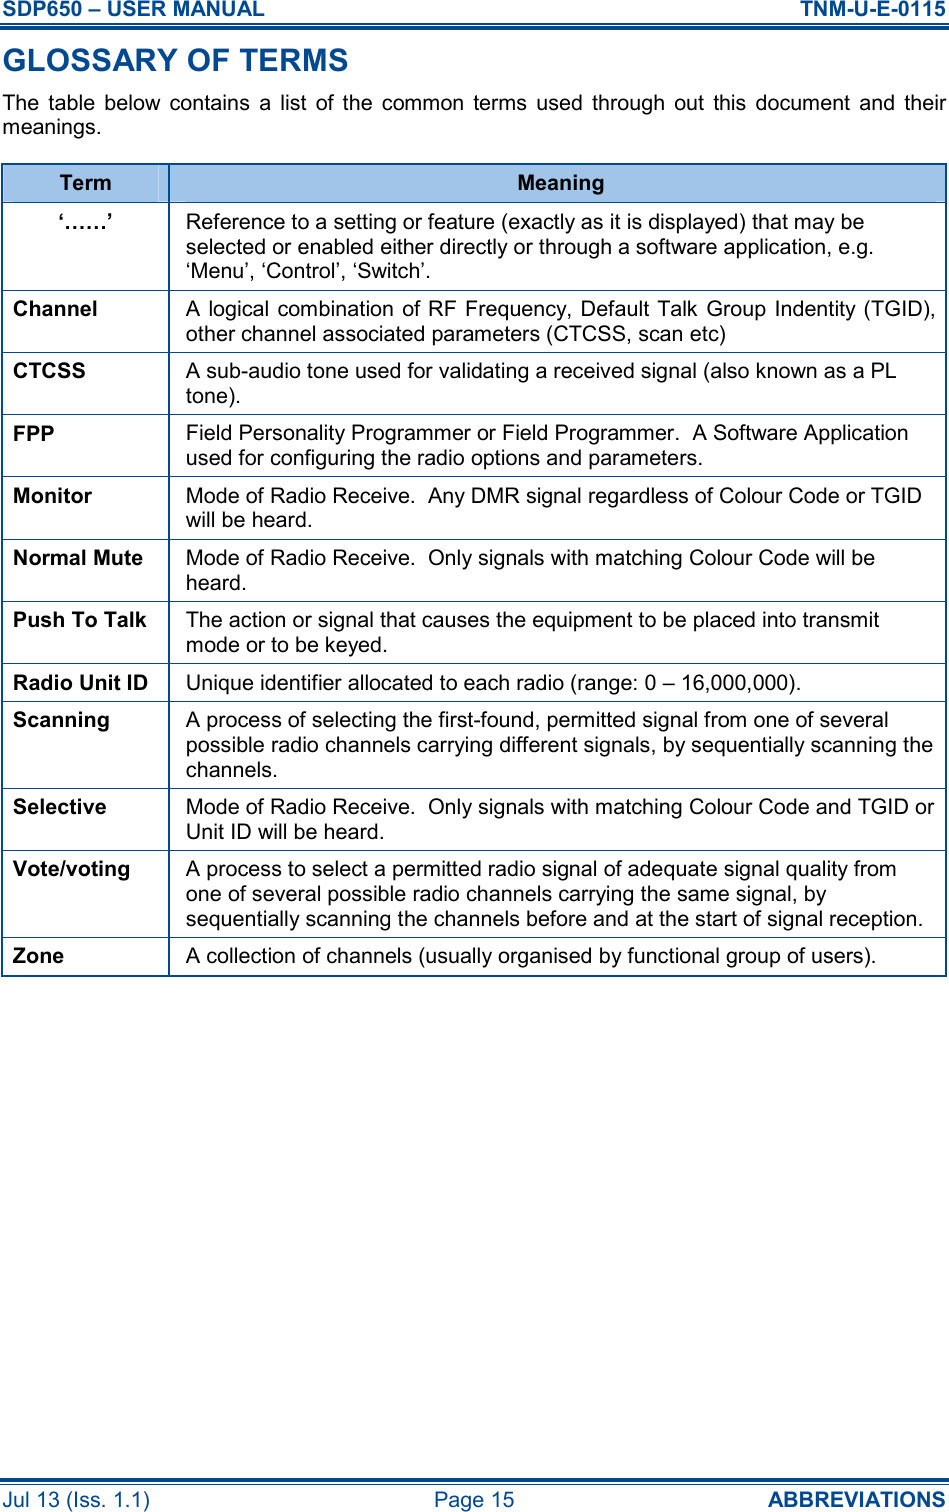 SDP650 – USER MANUAL  TNM-U-E-0115 Jul 13 (Iss. 1.1)  Page 15  ABBREVIATIONS GLOSSARY OF TERMS The  table  below  contains  a  list  of  the  common  terms  used  through  out  this  document  and  their meanings. Term  Meaning ‘……’  Reference to a setting or feature (exactly as it is displayed) that may be selected or enabled either directly or through a software application, e.g. ‘Menu’, ‘Control’, ‘Switch’. Channel  A logical  combination of RF Frequency, Default Talk Group Indentity (TGID), other channel associated parameters (CTCSS, scan etc) CTCSS  A sub-audio tone used for validating a received signal (also known as a PL tone). FPP  Field Personality Programmer or Field Programmer.  A Software Application used for configuring the radio options and parameters. Monitor  Mode of Radio Receive.  Any DMR signal regardless of Colour Code or TGID will be heard. Normal Mute  Mode of Radio Receive.  Only signals with matching Colour Code will be heard. Push To Talk  The action or signal that causes the equipment to be placed into transmit mode or to be keyed. Radio Unit ID  Unique identifier allocated to each radio (range: 0 – 16,000,000). Scanning  A process of selecting the first-found, permitted signal from one of several possible radio channels carrying different signals, by sequentially scanning the channels. Selective  Mode of Radio Receive.  Only signals with matching Colour Code and TGID or Unit ID will be heard. Vote/voting  A process to select a permitted radio signal of adequate signal quality from one of several possible radio channels carrying the same signal, by sequentially scanning the channels before and at the start of signal reception. Zone  A collection of channels (usually organised by functional group of users).     